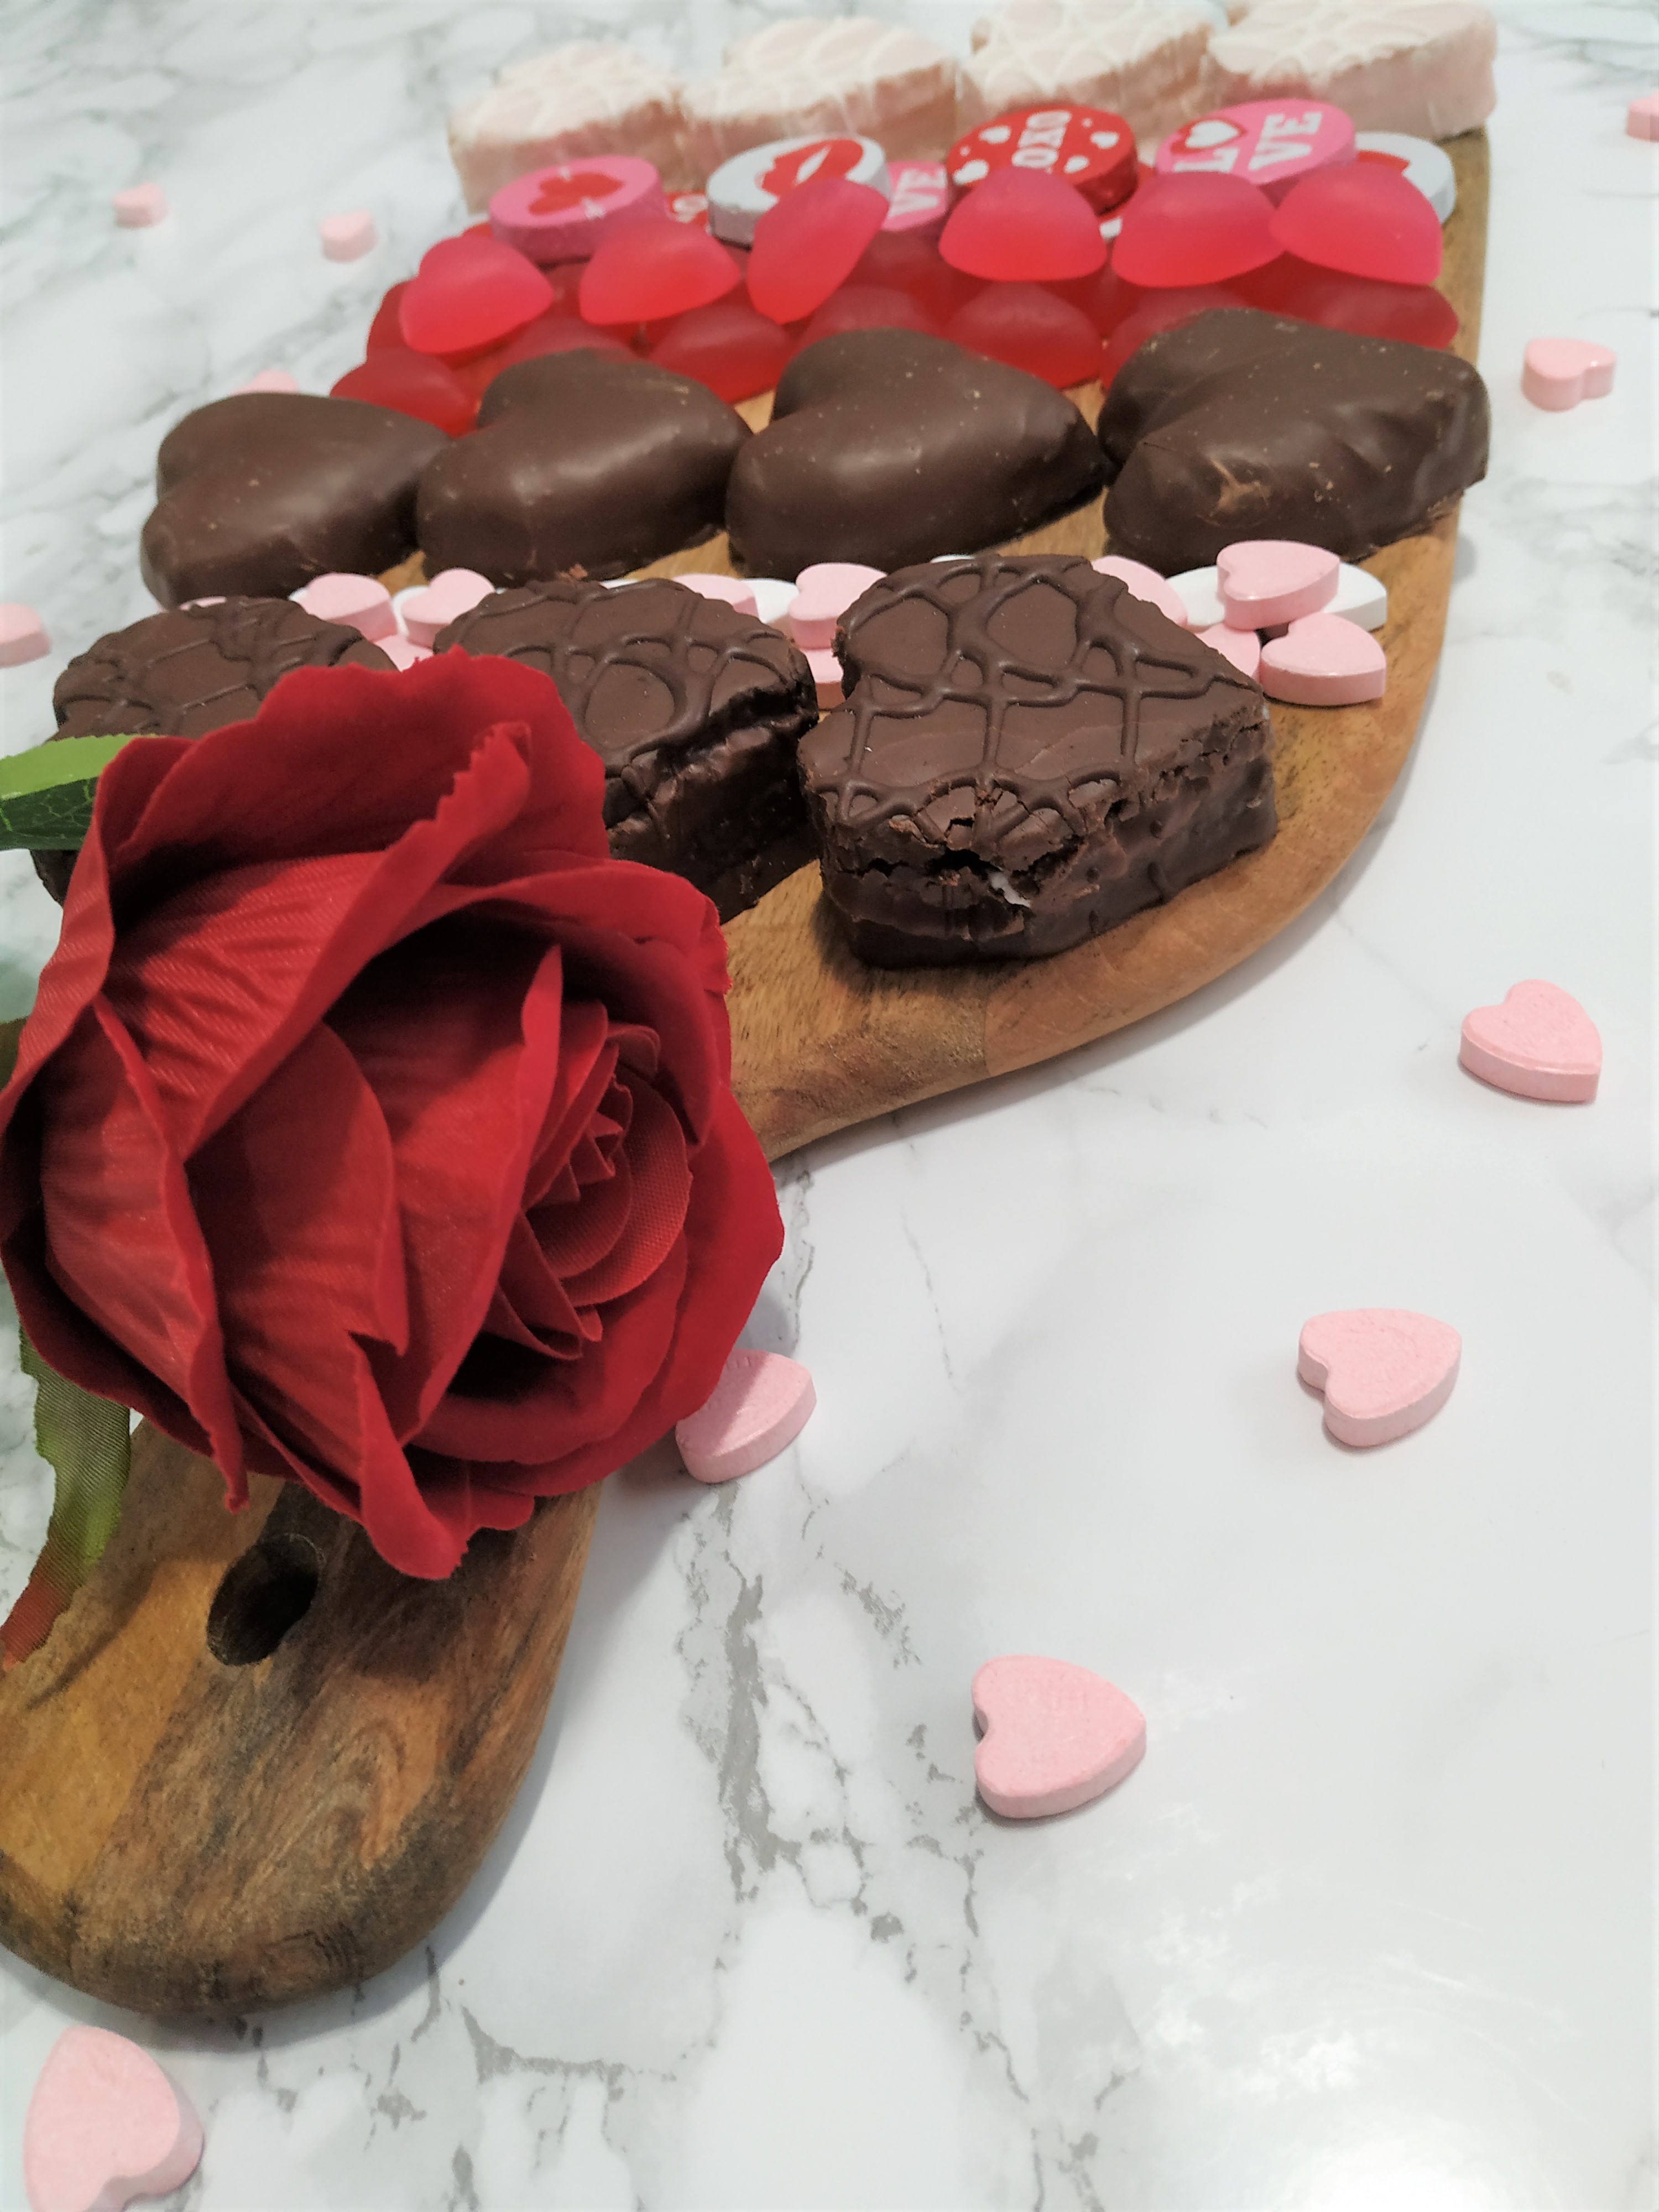 Angled view of a candy charcuterie board decorated with a red rose.